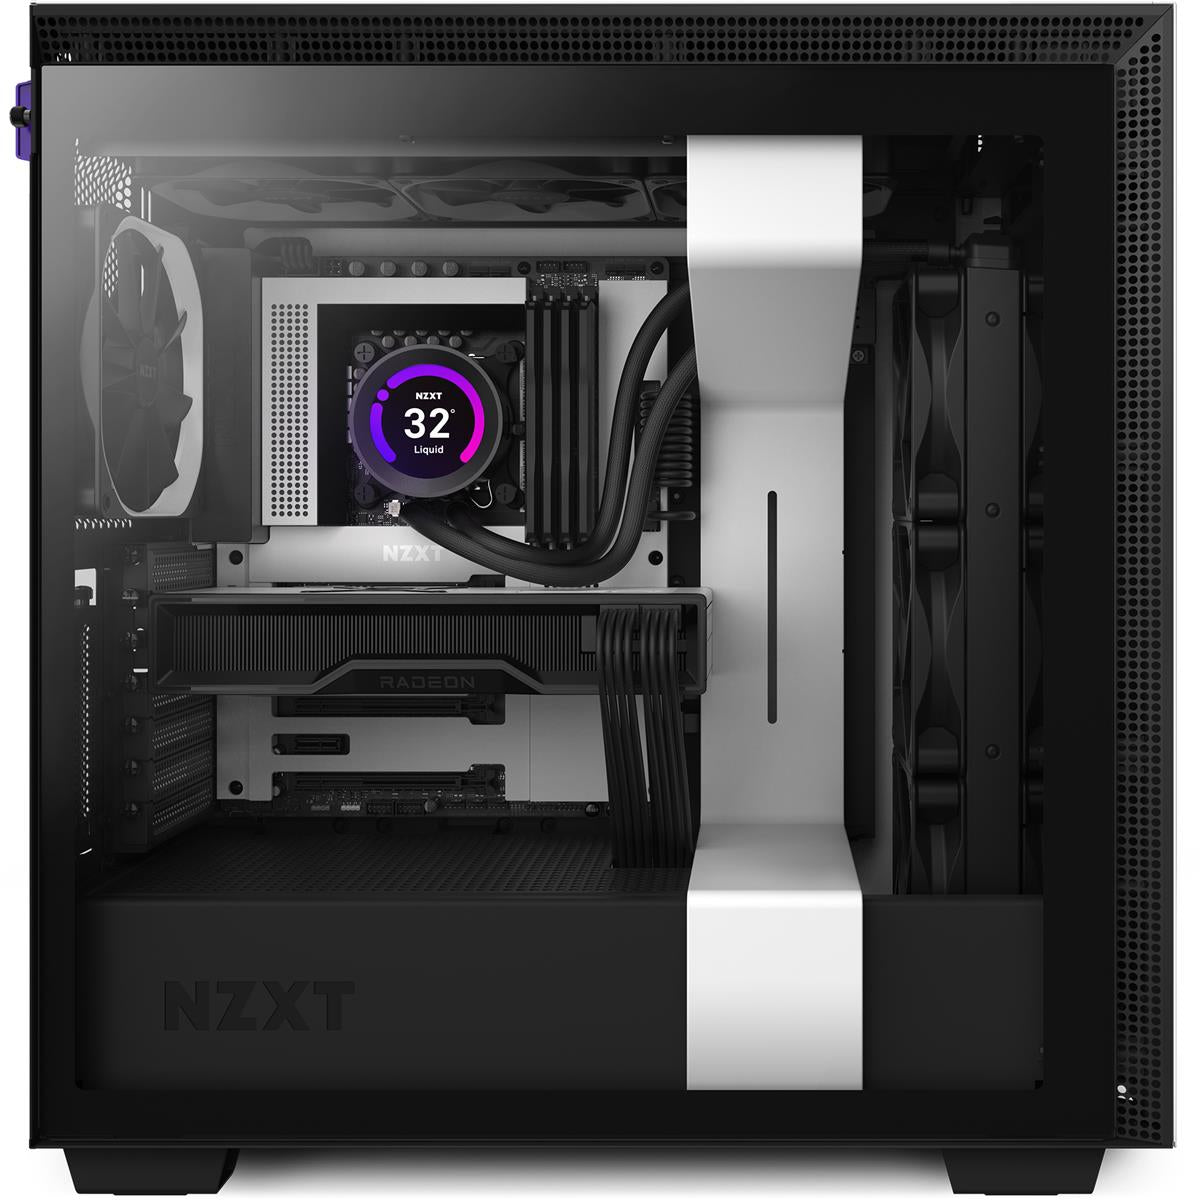 NZXT N7 Z690 DDR4 White NZXT